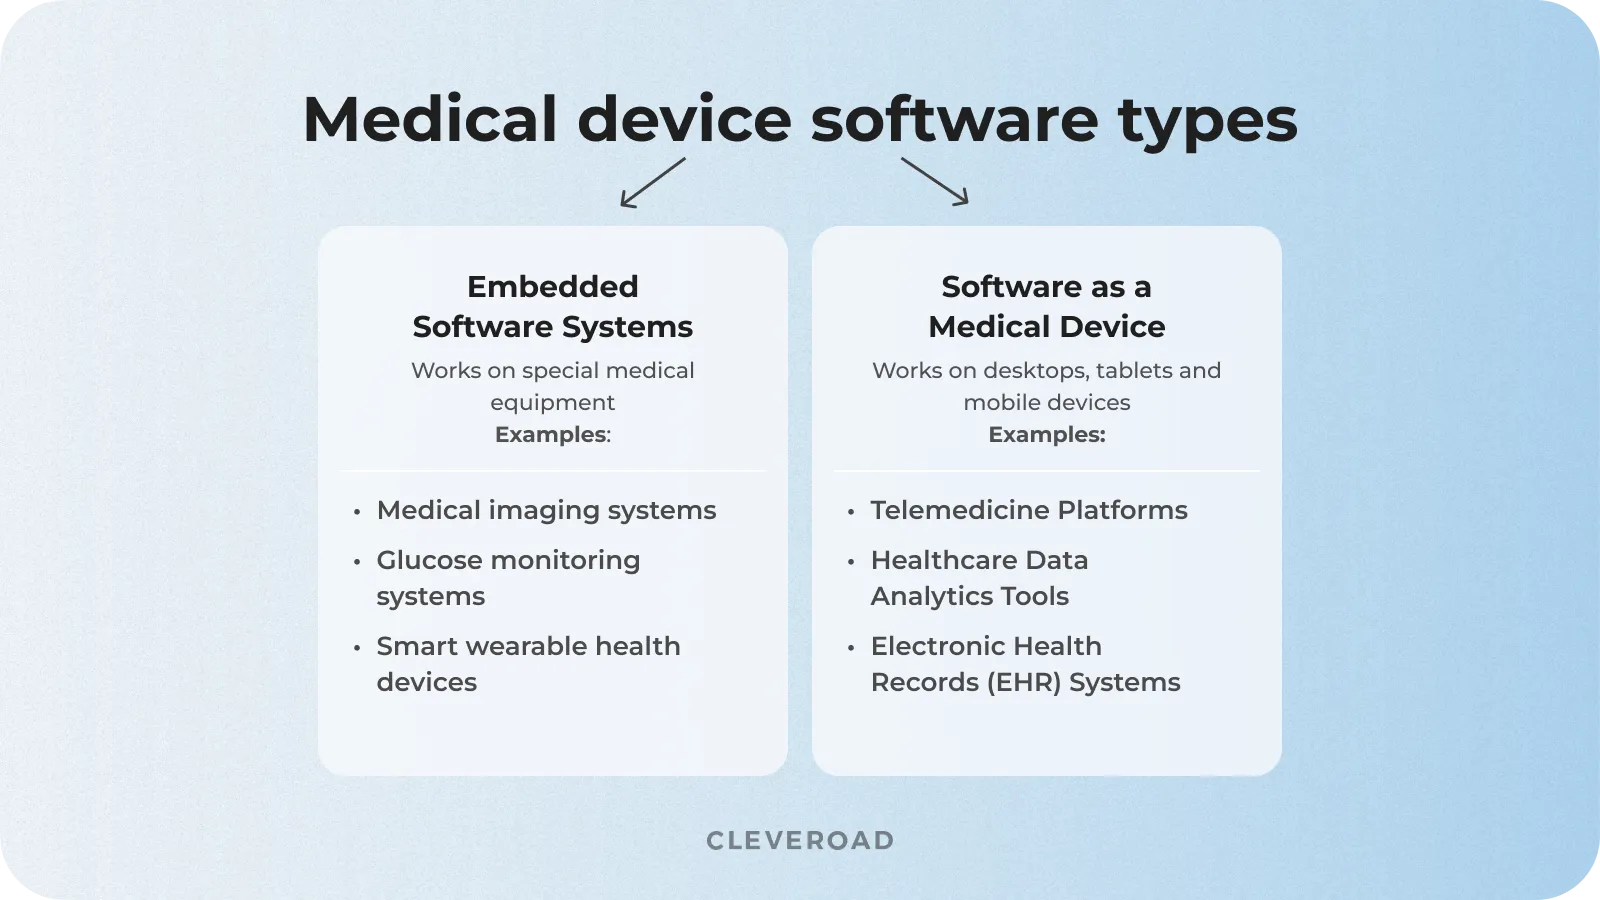 Types of medical device software